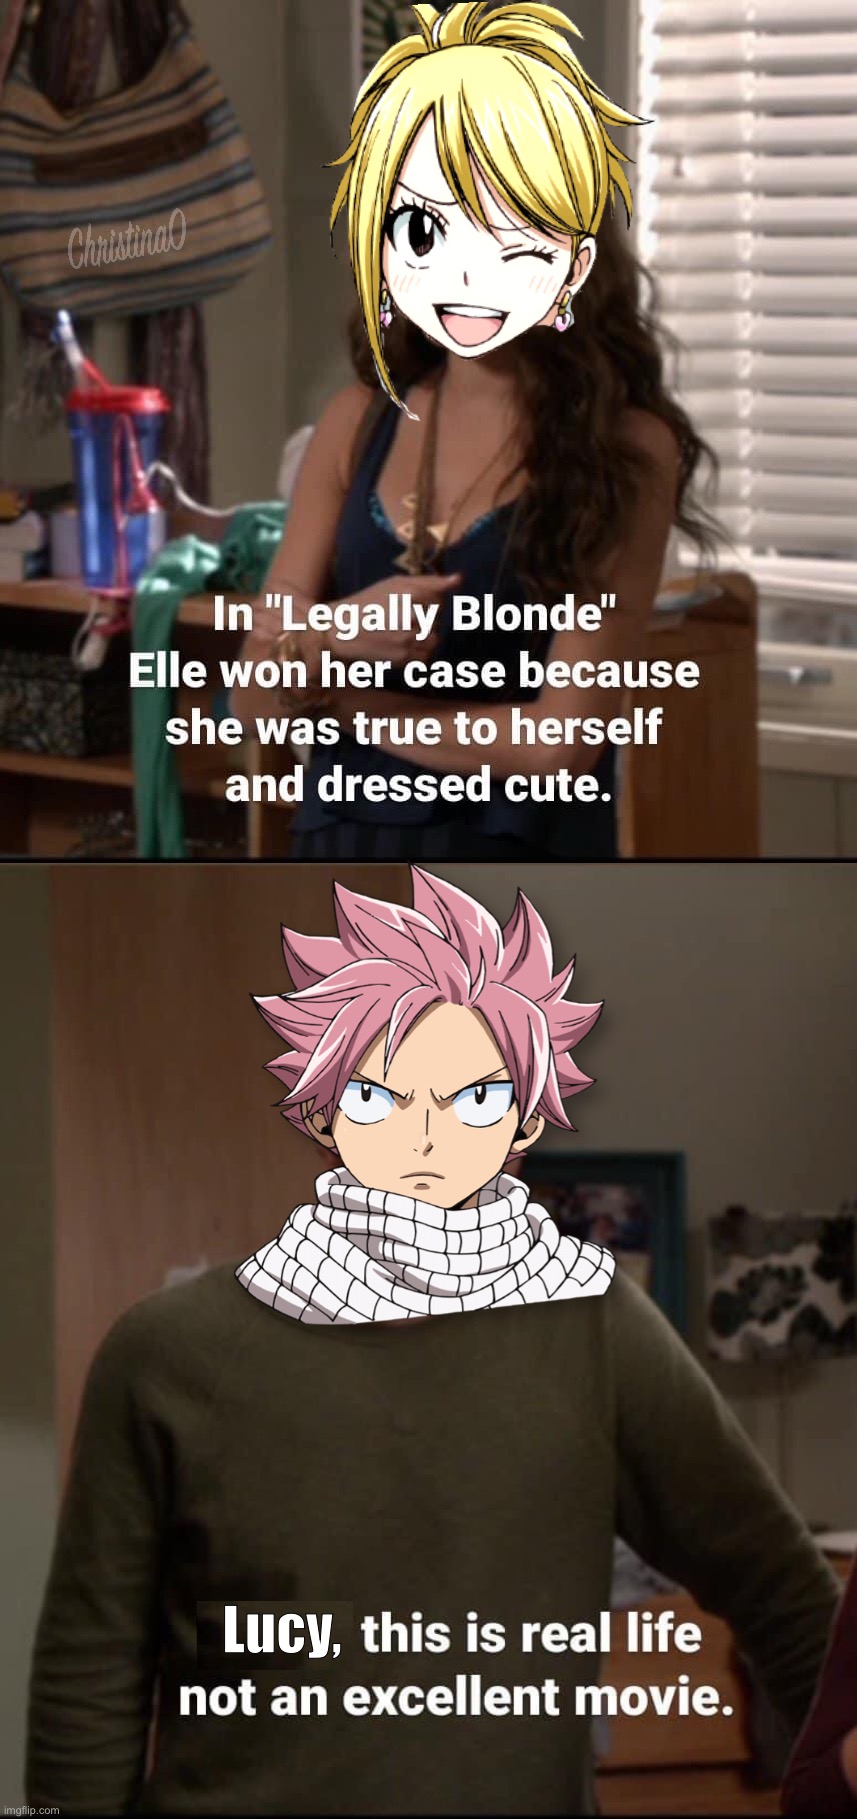 Modern Family, Legally Blonde and Fairy Tail Crossover Meme | Lucy, | image tagged in memes,modern family,fairy tail,fairy tail meme,lucy heartfilia,dumb blonde | made w/ Imgflip meme maker